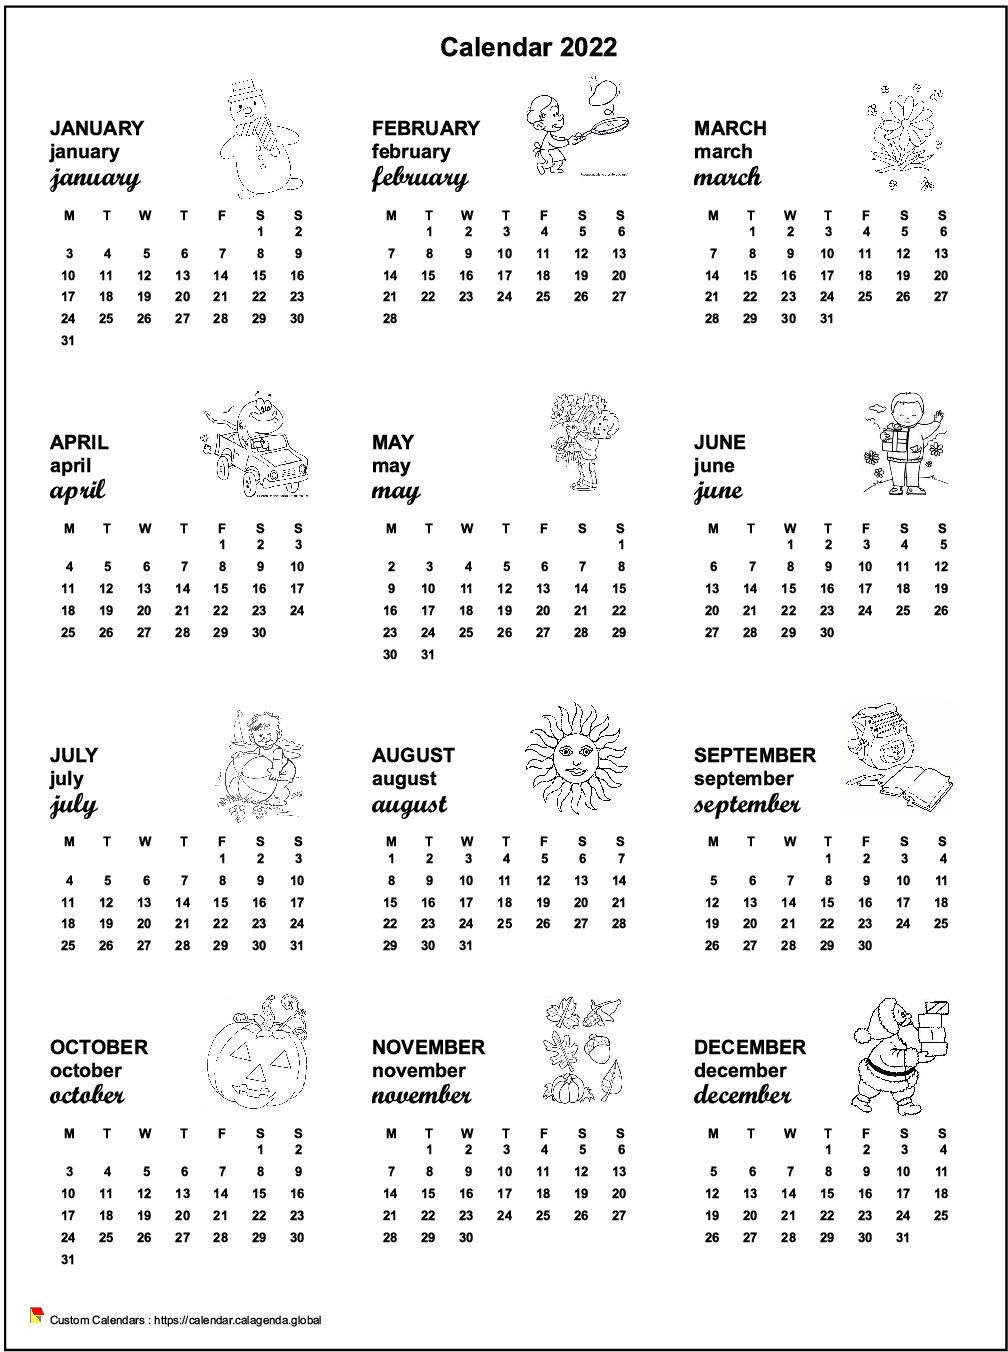 Calendar 2092 annual maternal and primary school